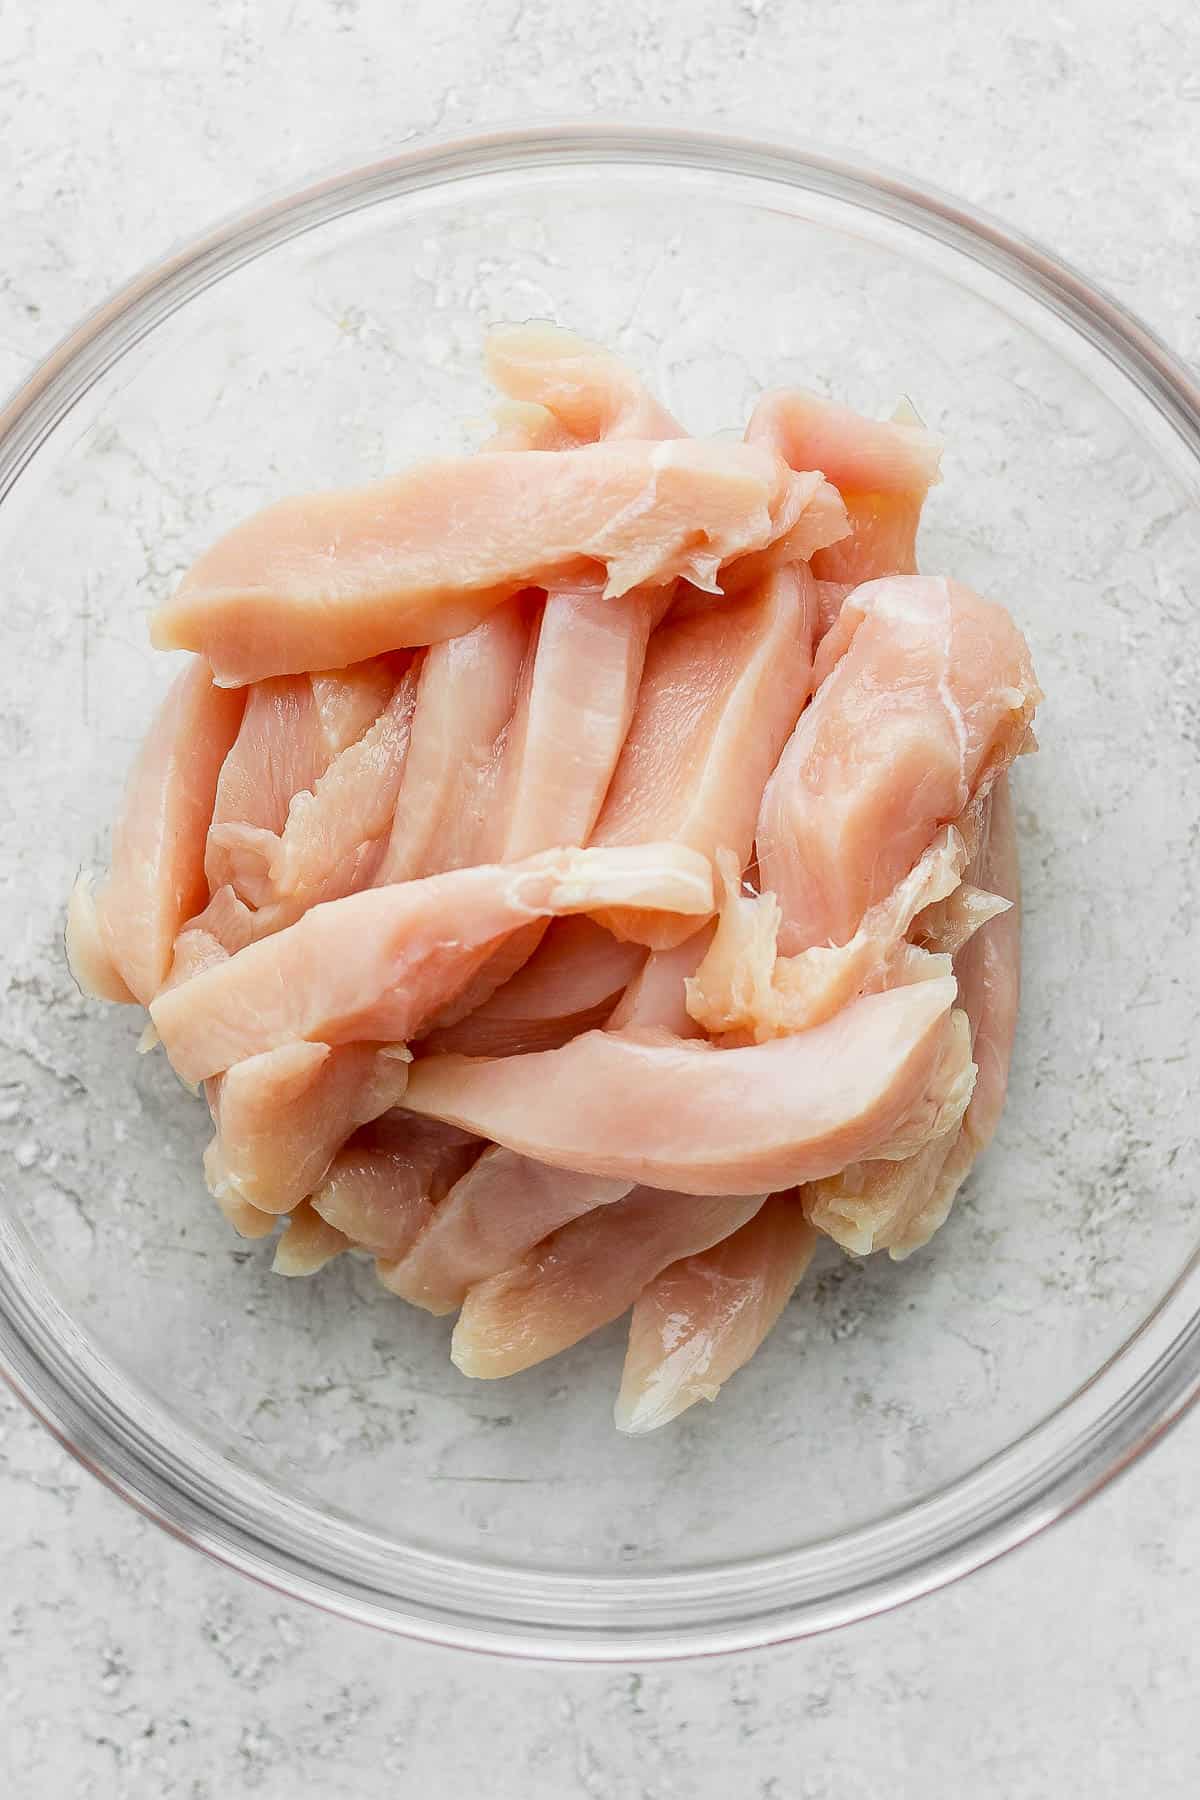 Raw chicken cut into tenders and placed in a glass bowl.